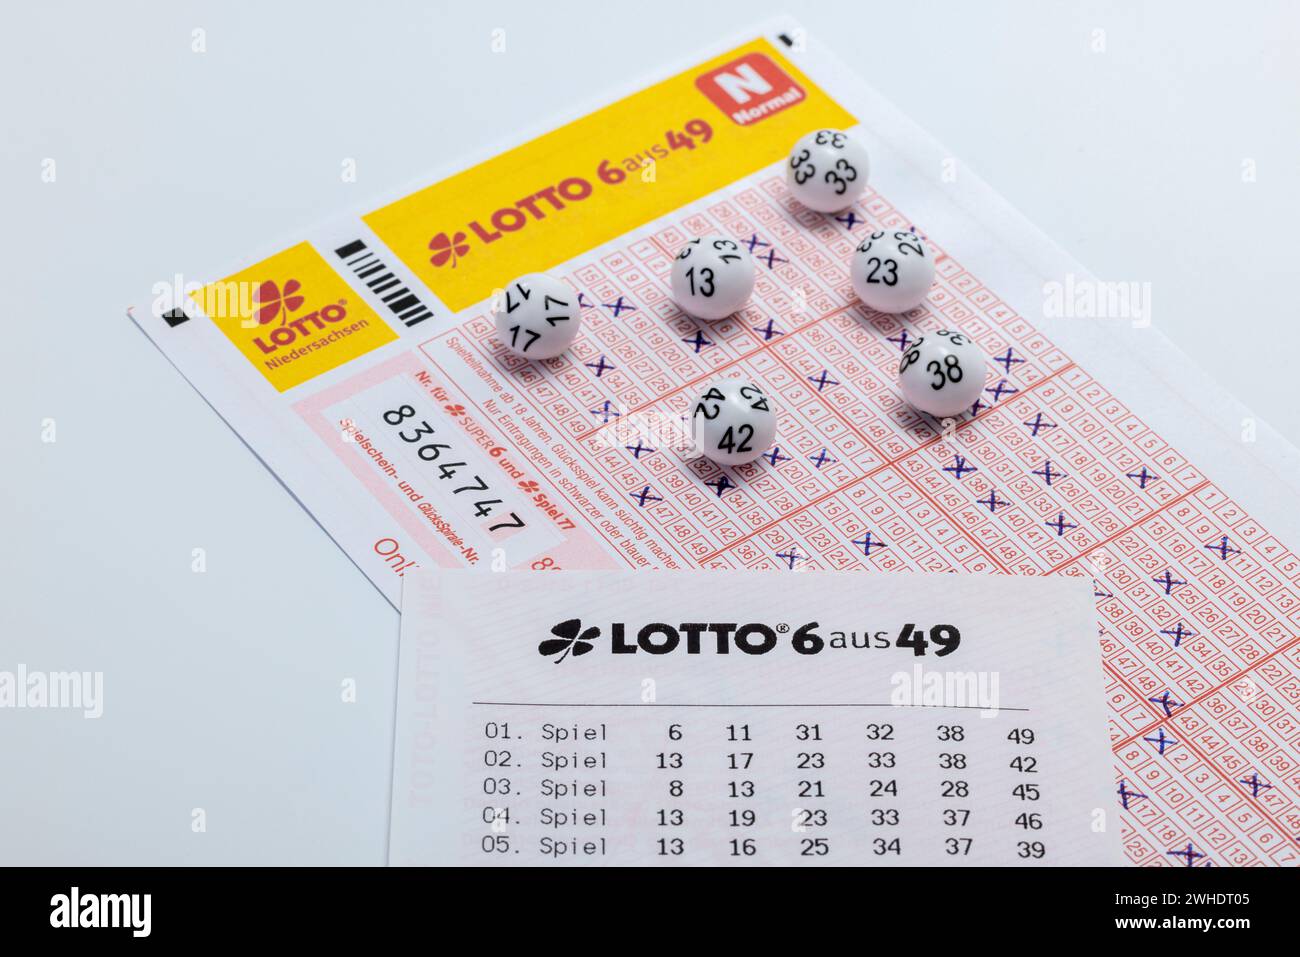 Lotto balls lying on a completed lottery ticket, LOTTO 6aus49, receipt, white background, Stock Photo